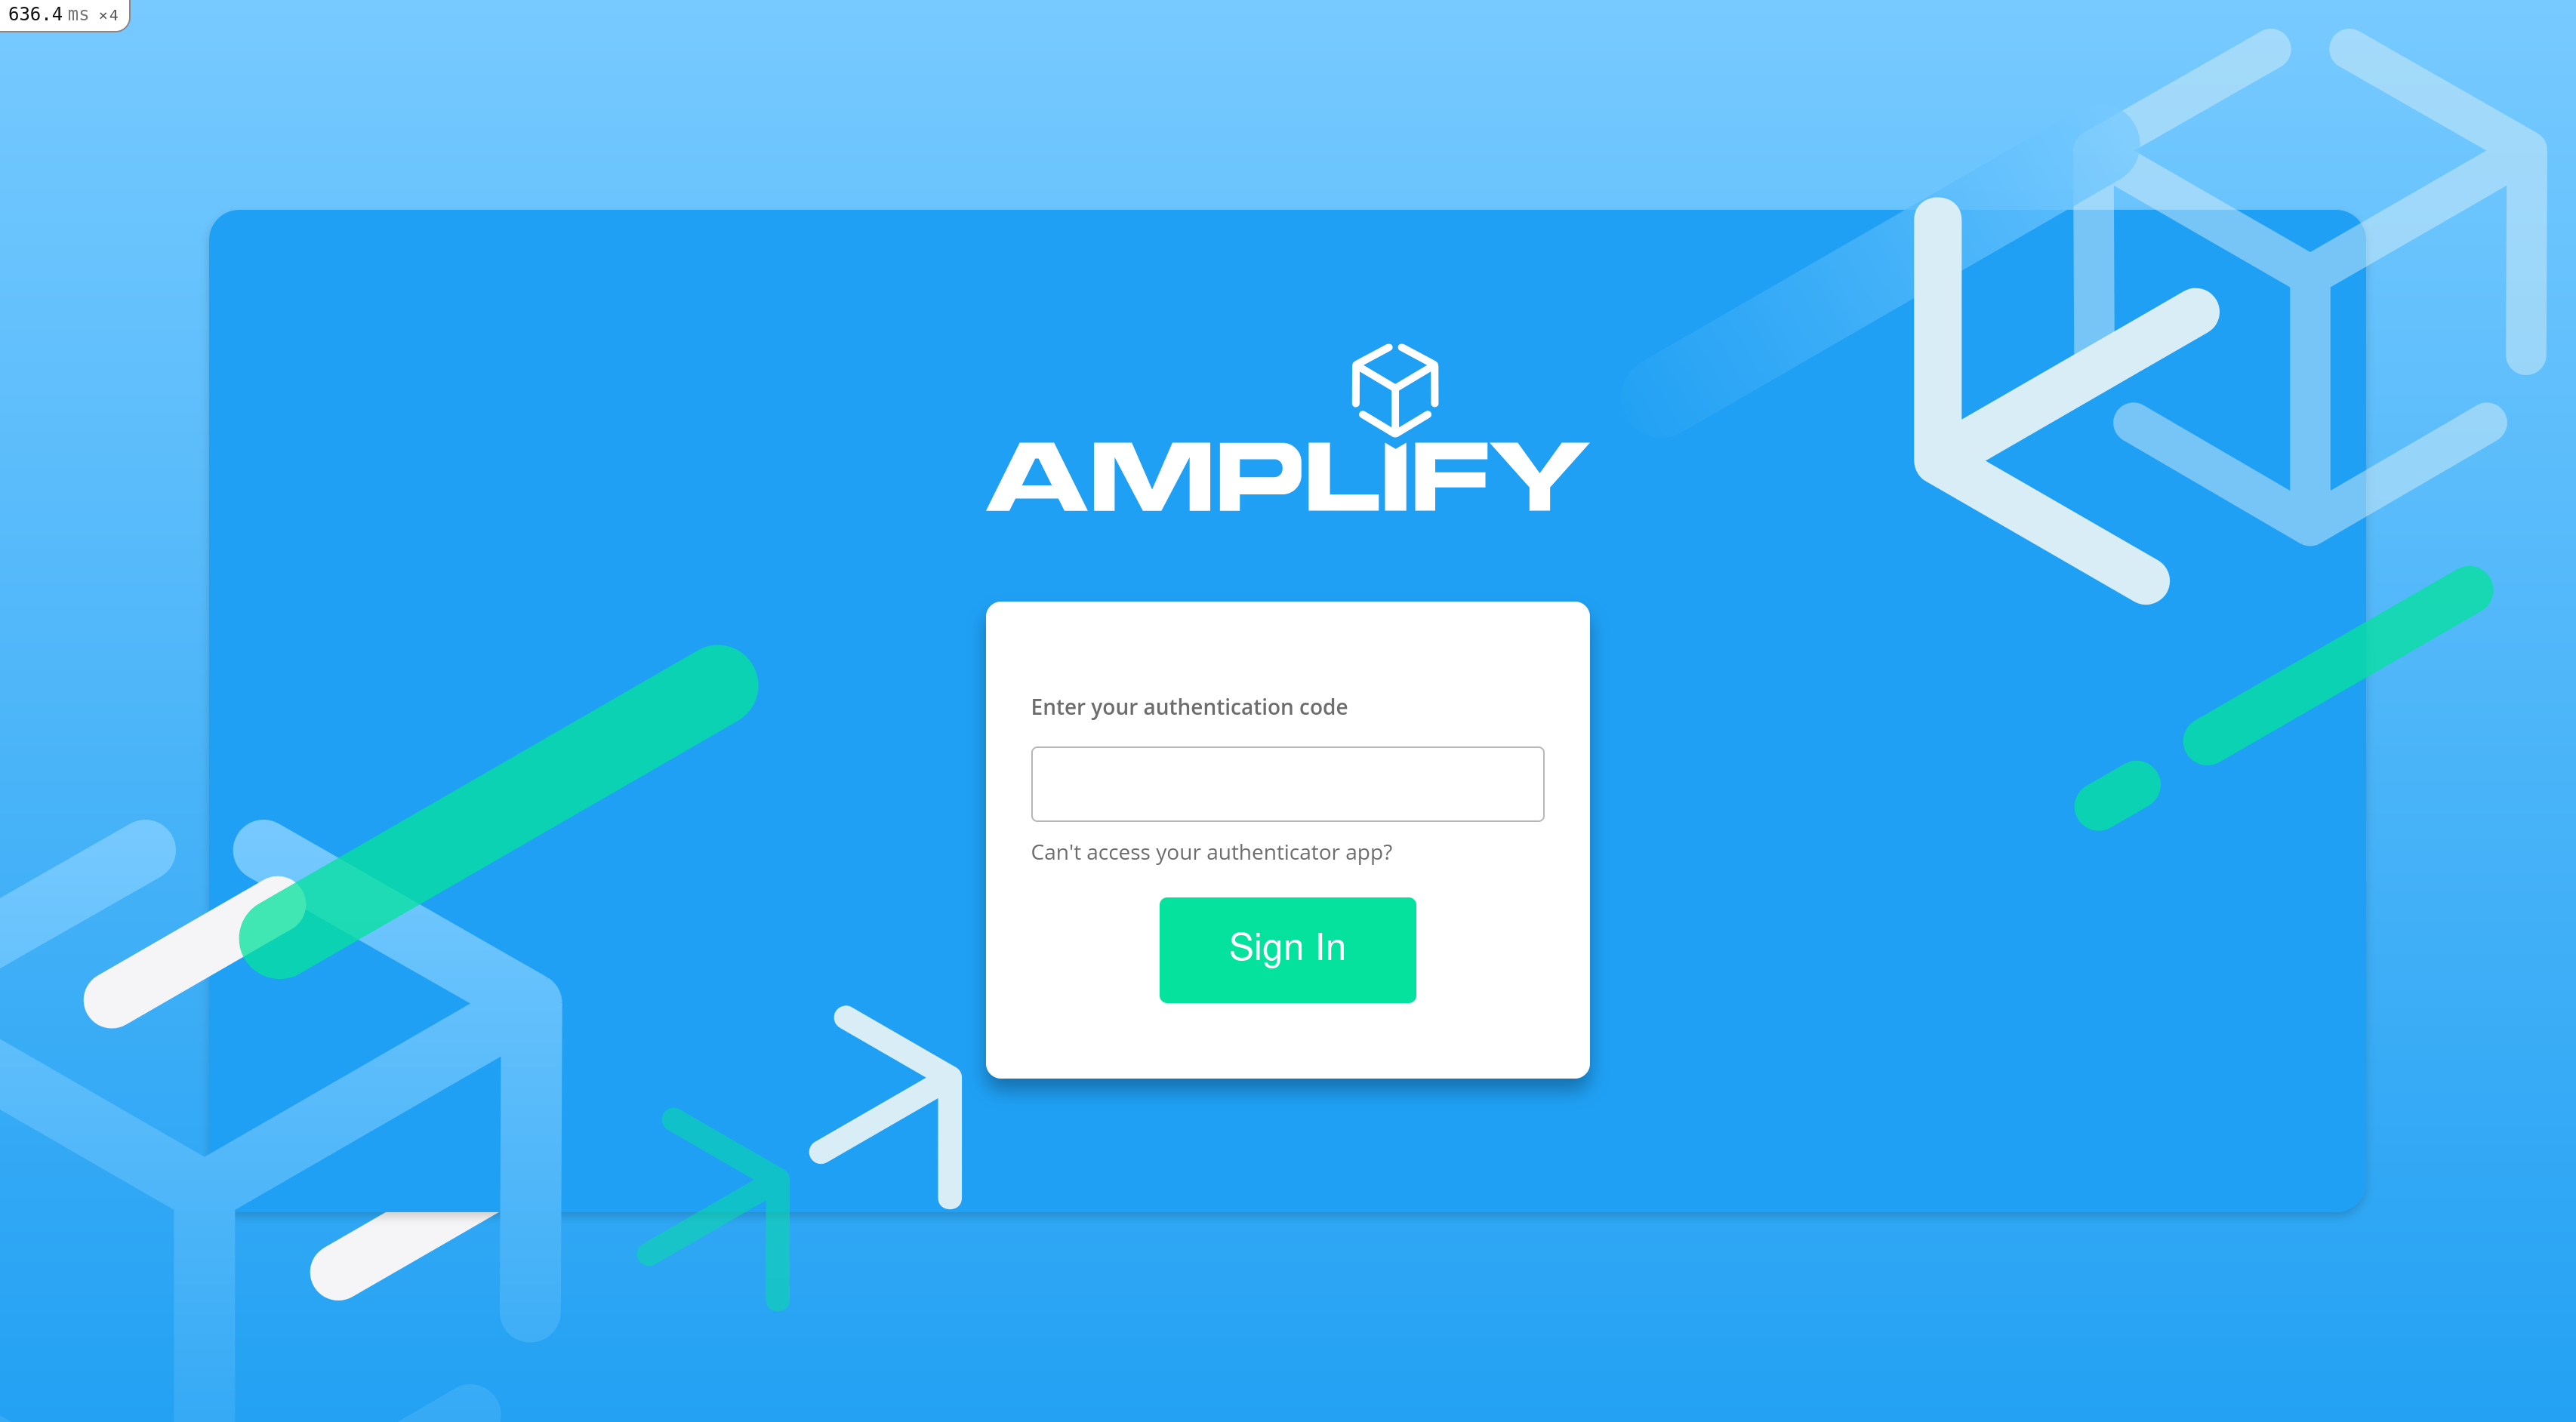 Amplify authentication screen with new design